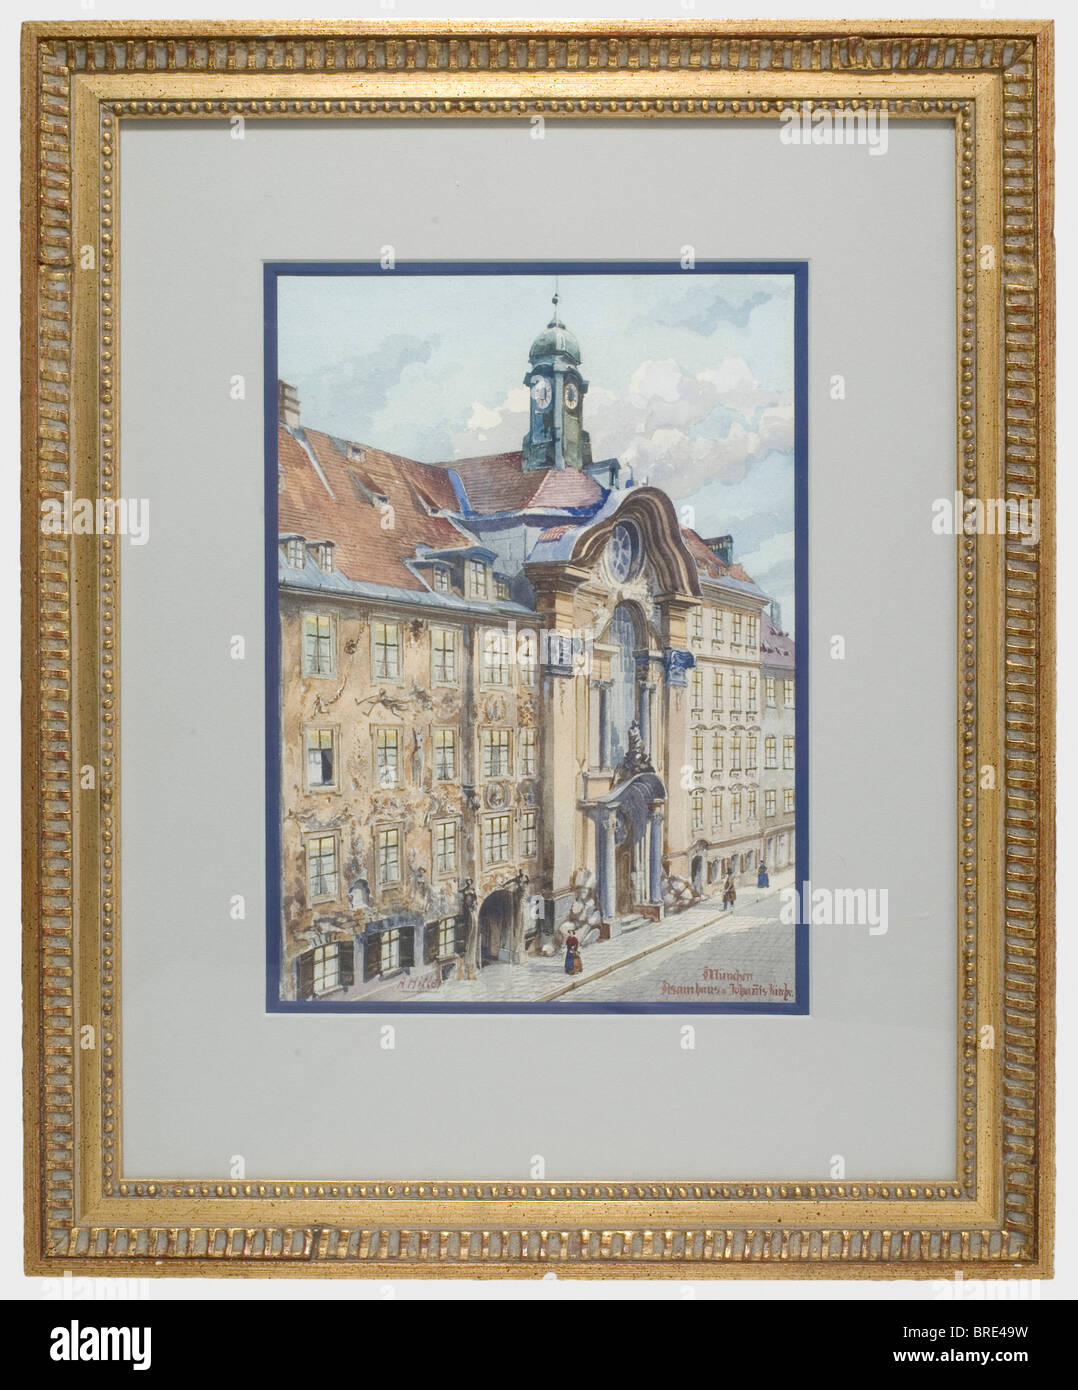 Adolf Hitler, the watercolour 'Asamhaus & Johanis Kirche' Extremely well executed painting on textured watercolour pa fine arts, people, 1910s, 20th century, NS, National Socialism, Nazism, Third Reich, German Reich, Germany, German, National Socialist, Nazi, Nazi period, fascism, object, objects, stills, clipping, clippings, cut out, cut-out, cut-outs, fine arts, art, art object, art objects, artful, precious, collectible, collector's item, collectibles, collector's items, rarity, rarities, Artist's Copyright has not to be cleared Stock Photo